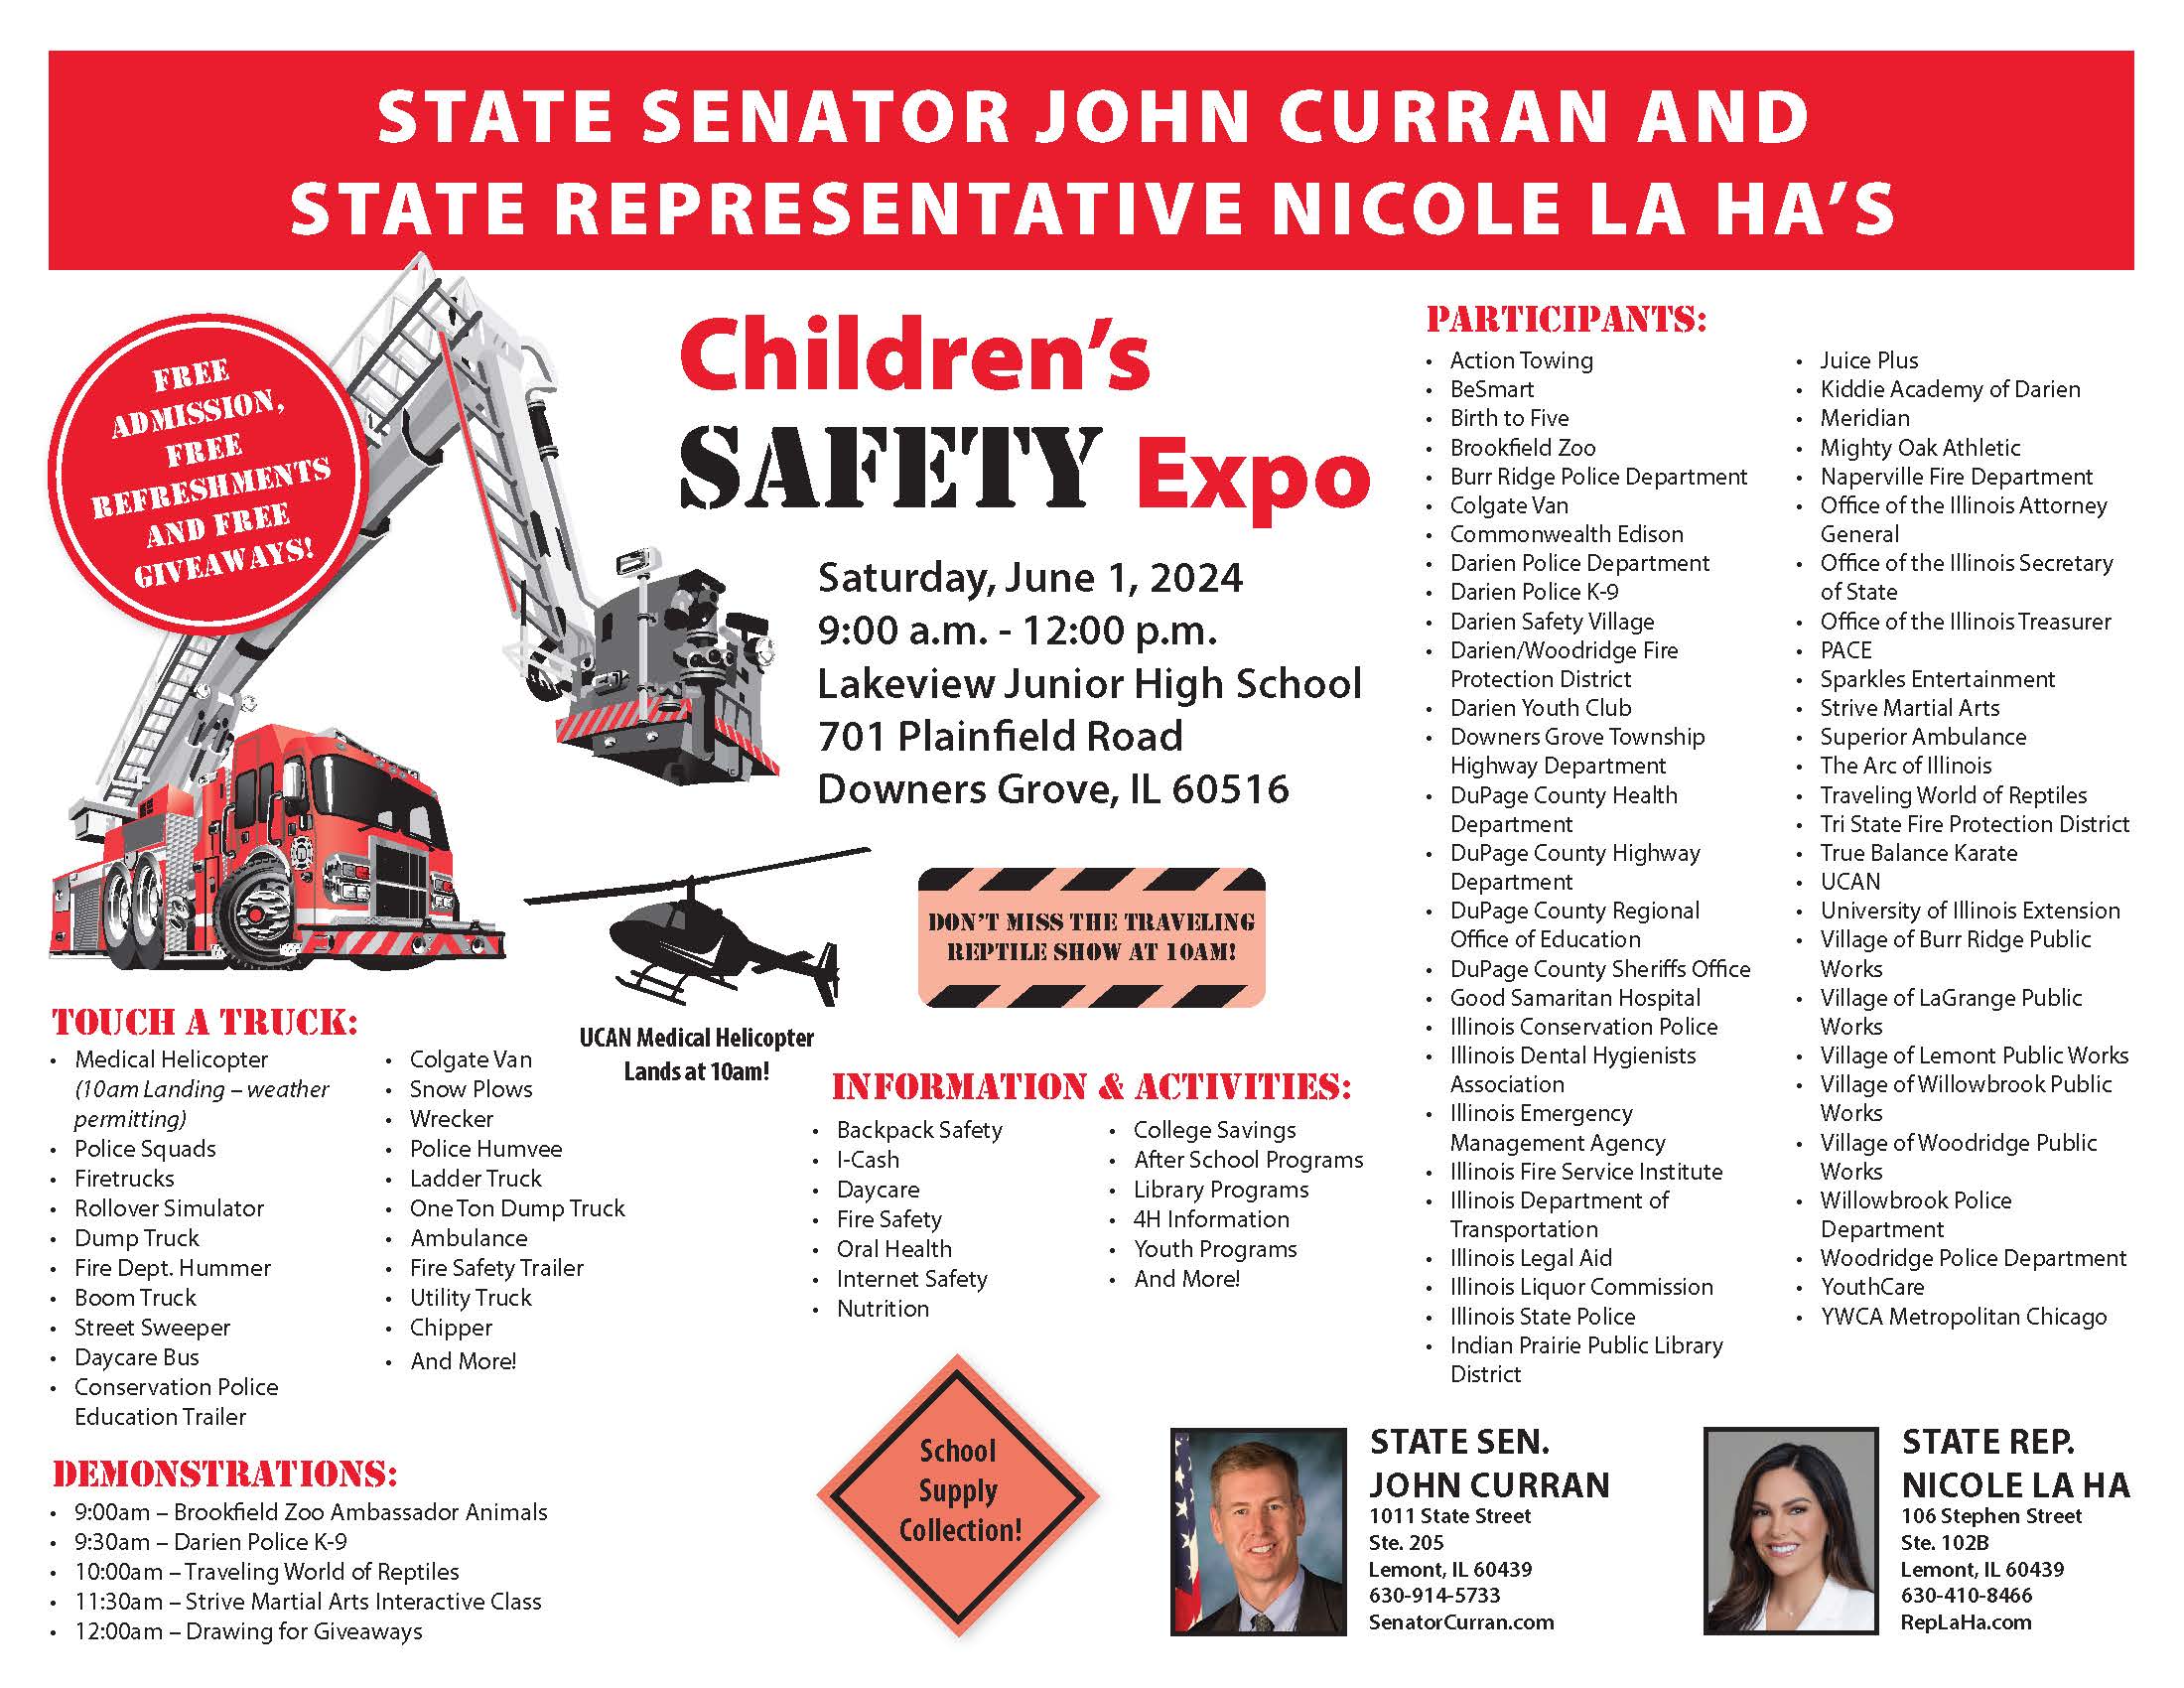 Children’s Safety Expo Event Hosted By Sen. John Curran and Rep. Nicole La Ha